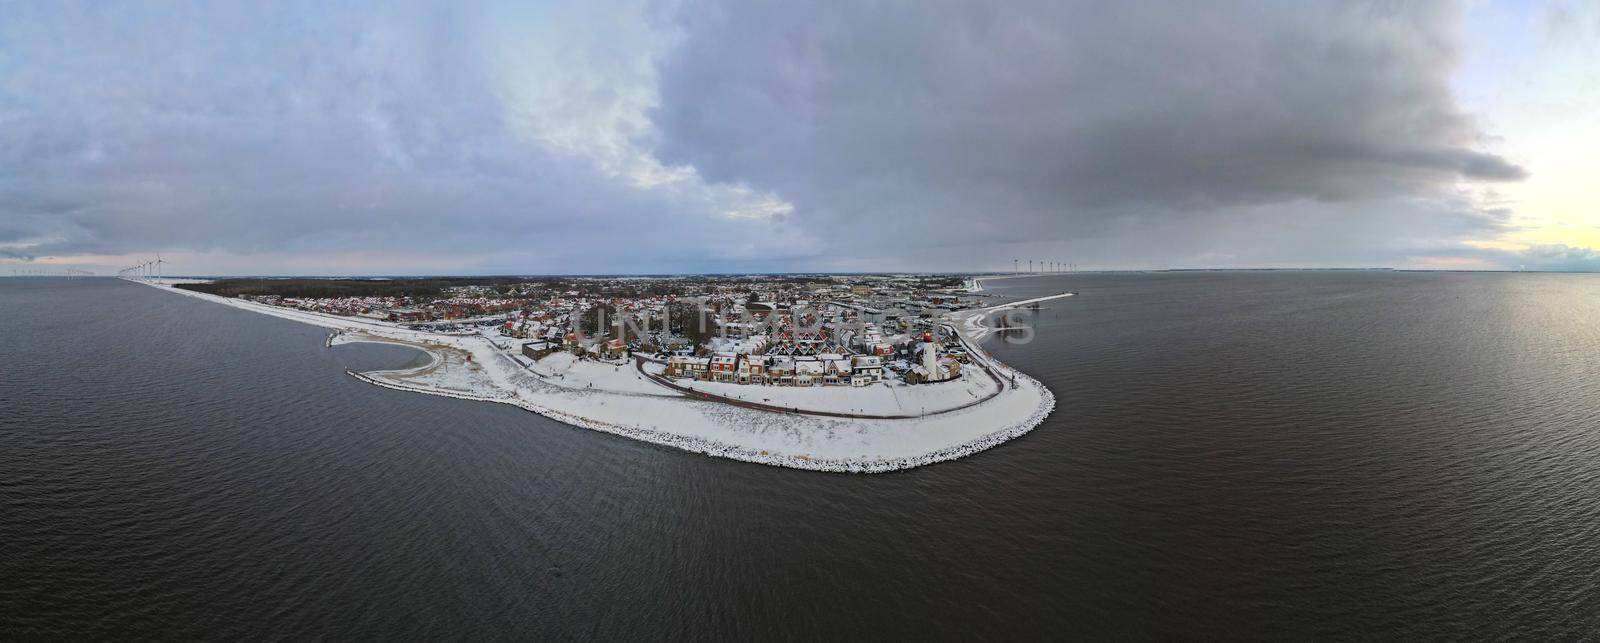 snow covered beach during wnter by Urk lighthouse in the Netherlands by fokkebok